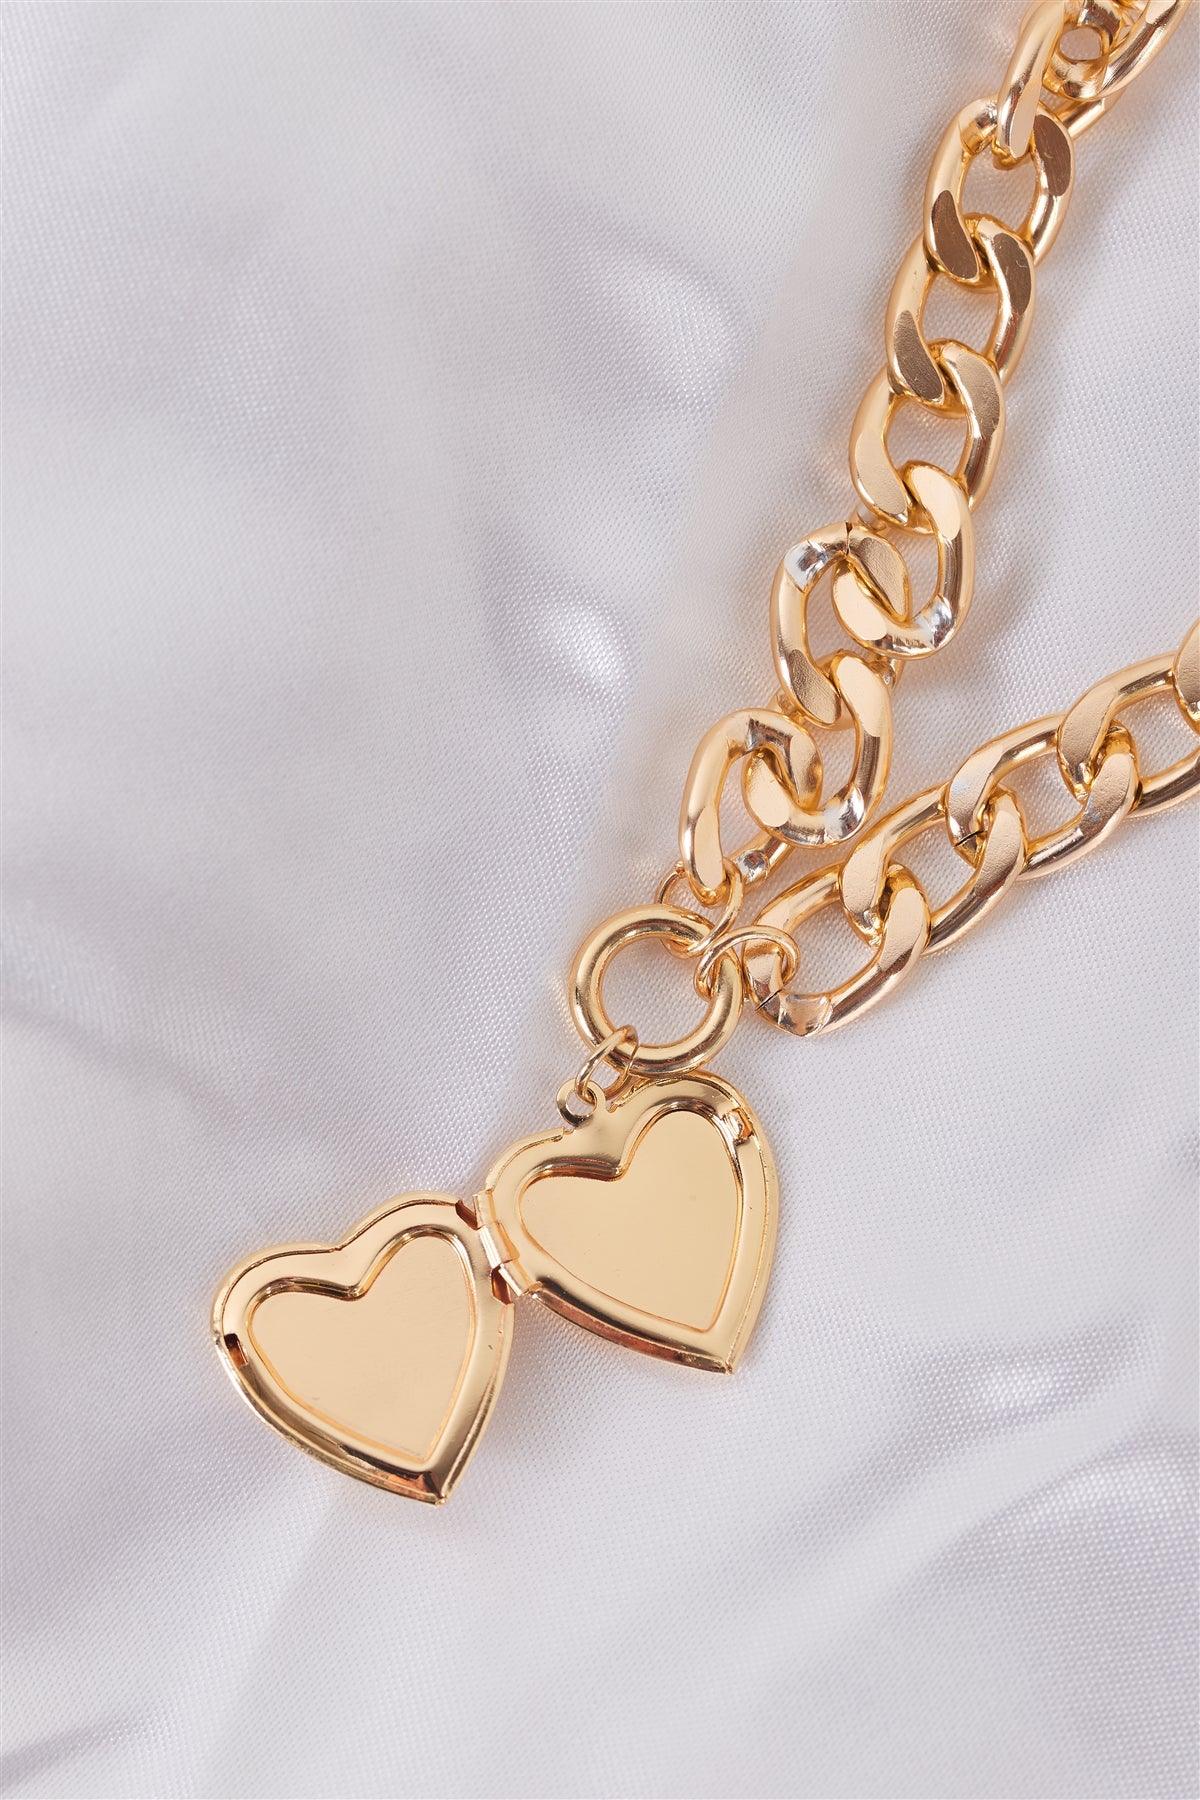 "Sailor Moon" Gold Chunky Link Chain With White Pearl Heart Medallion Set Necklace /3 Pieces